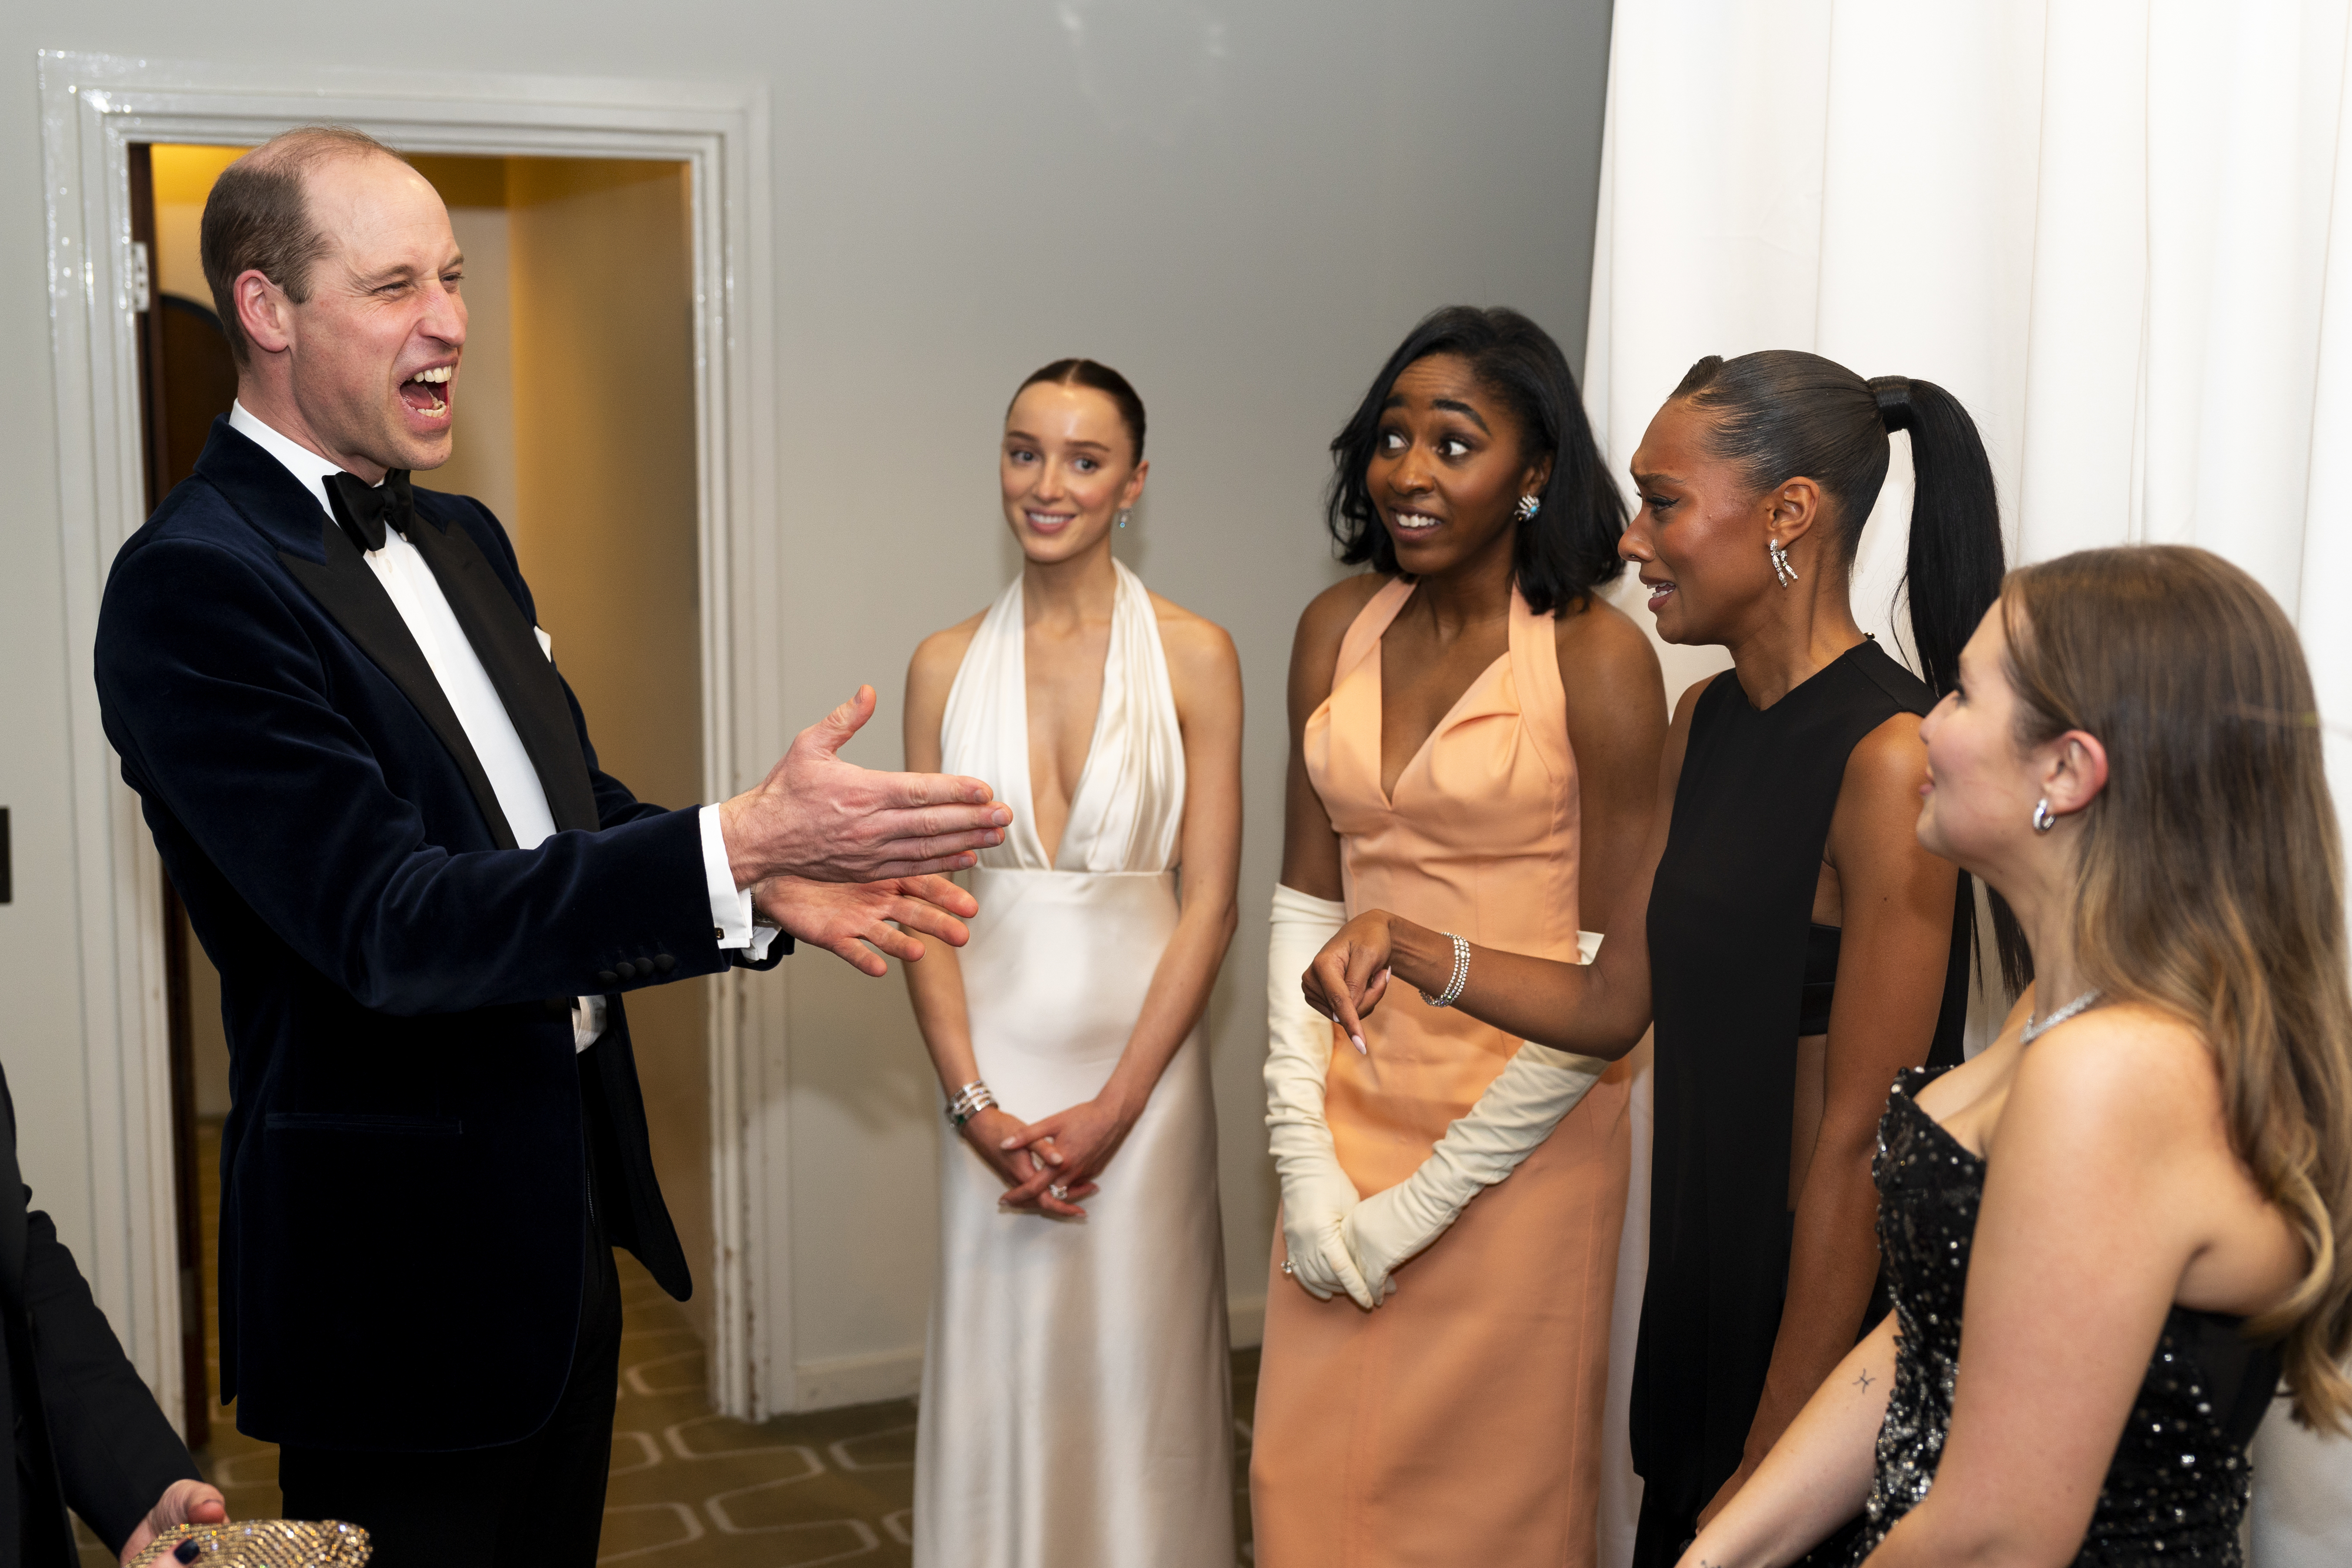 Prince William, in a black tuxedo, greets a group of four women including Ayo Edebiri in elegant evening dresses at a formal event